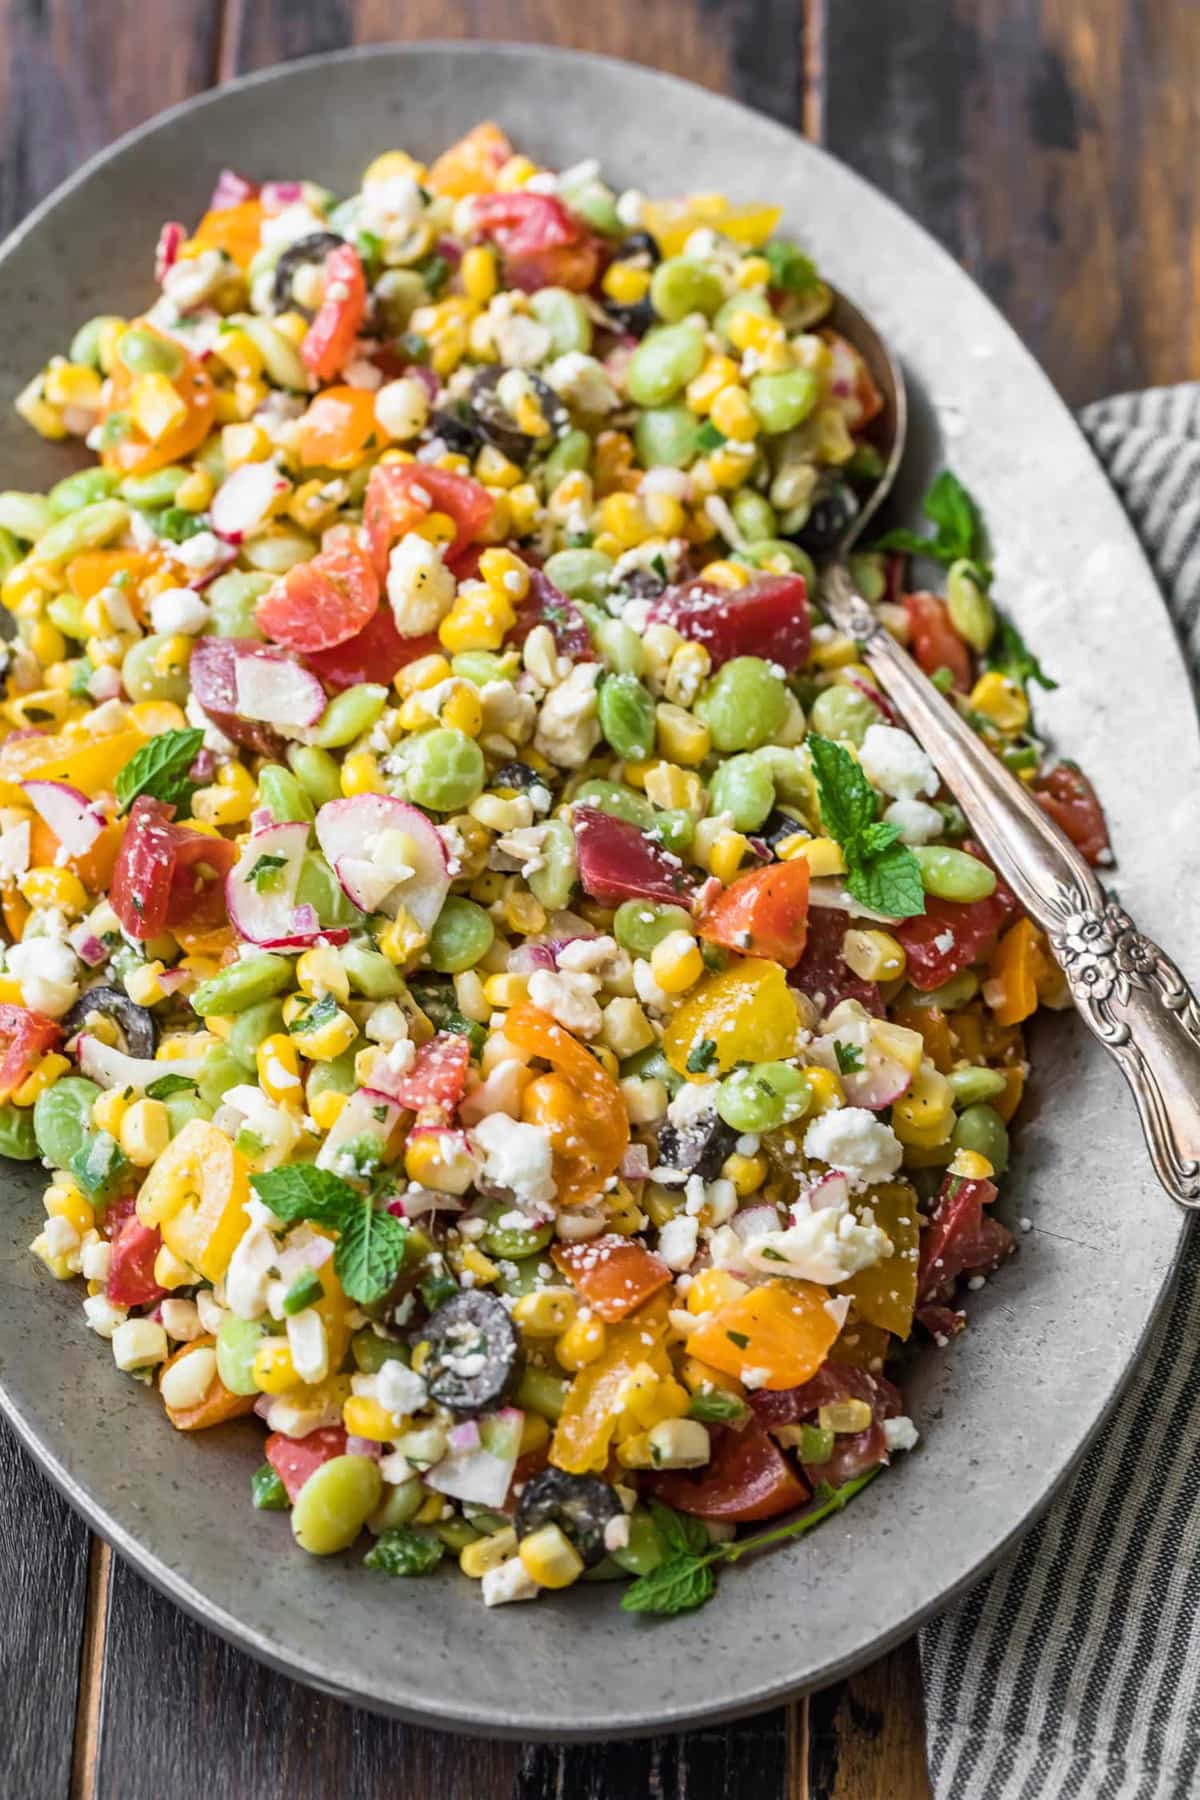 Chopped salad on a plate with a serving spoon